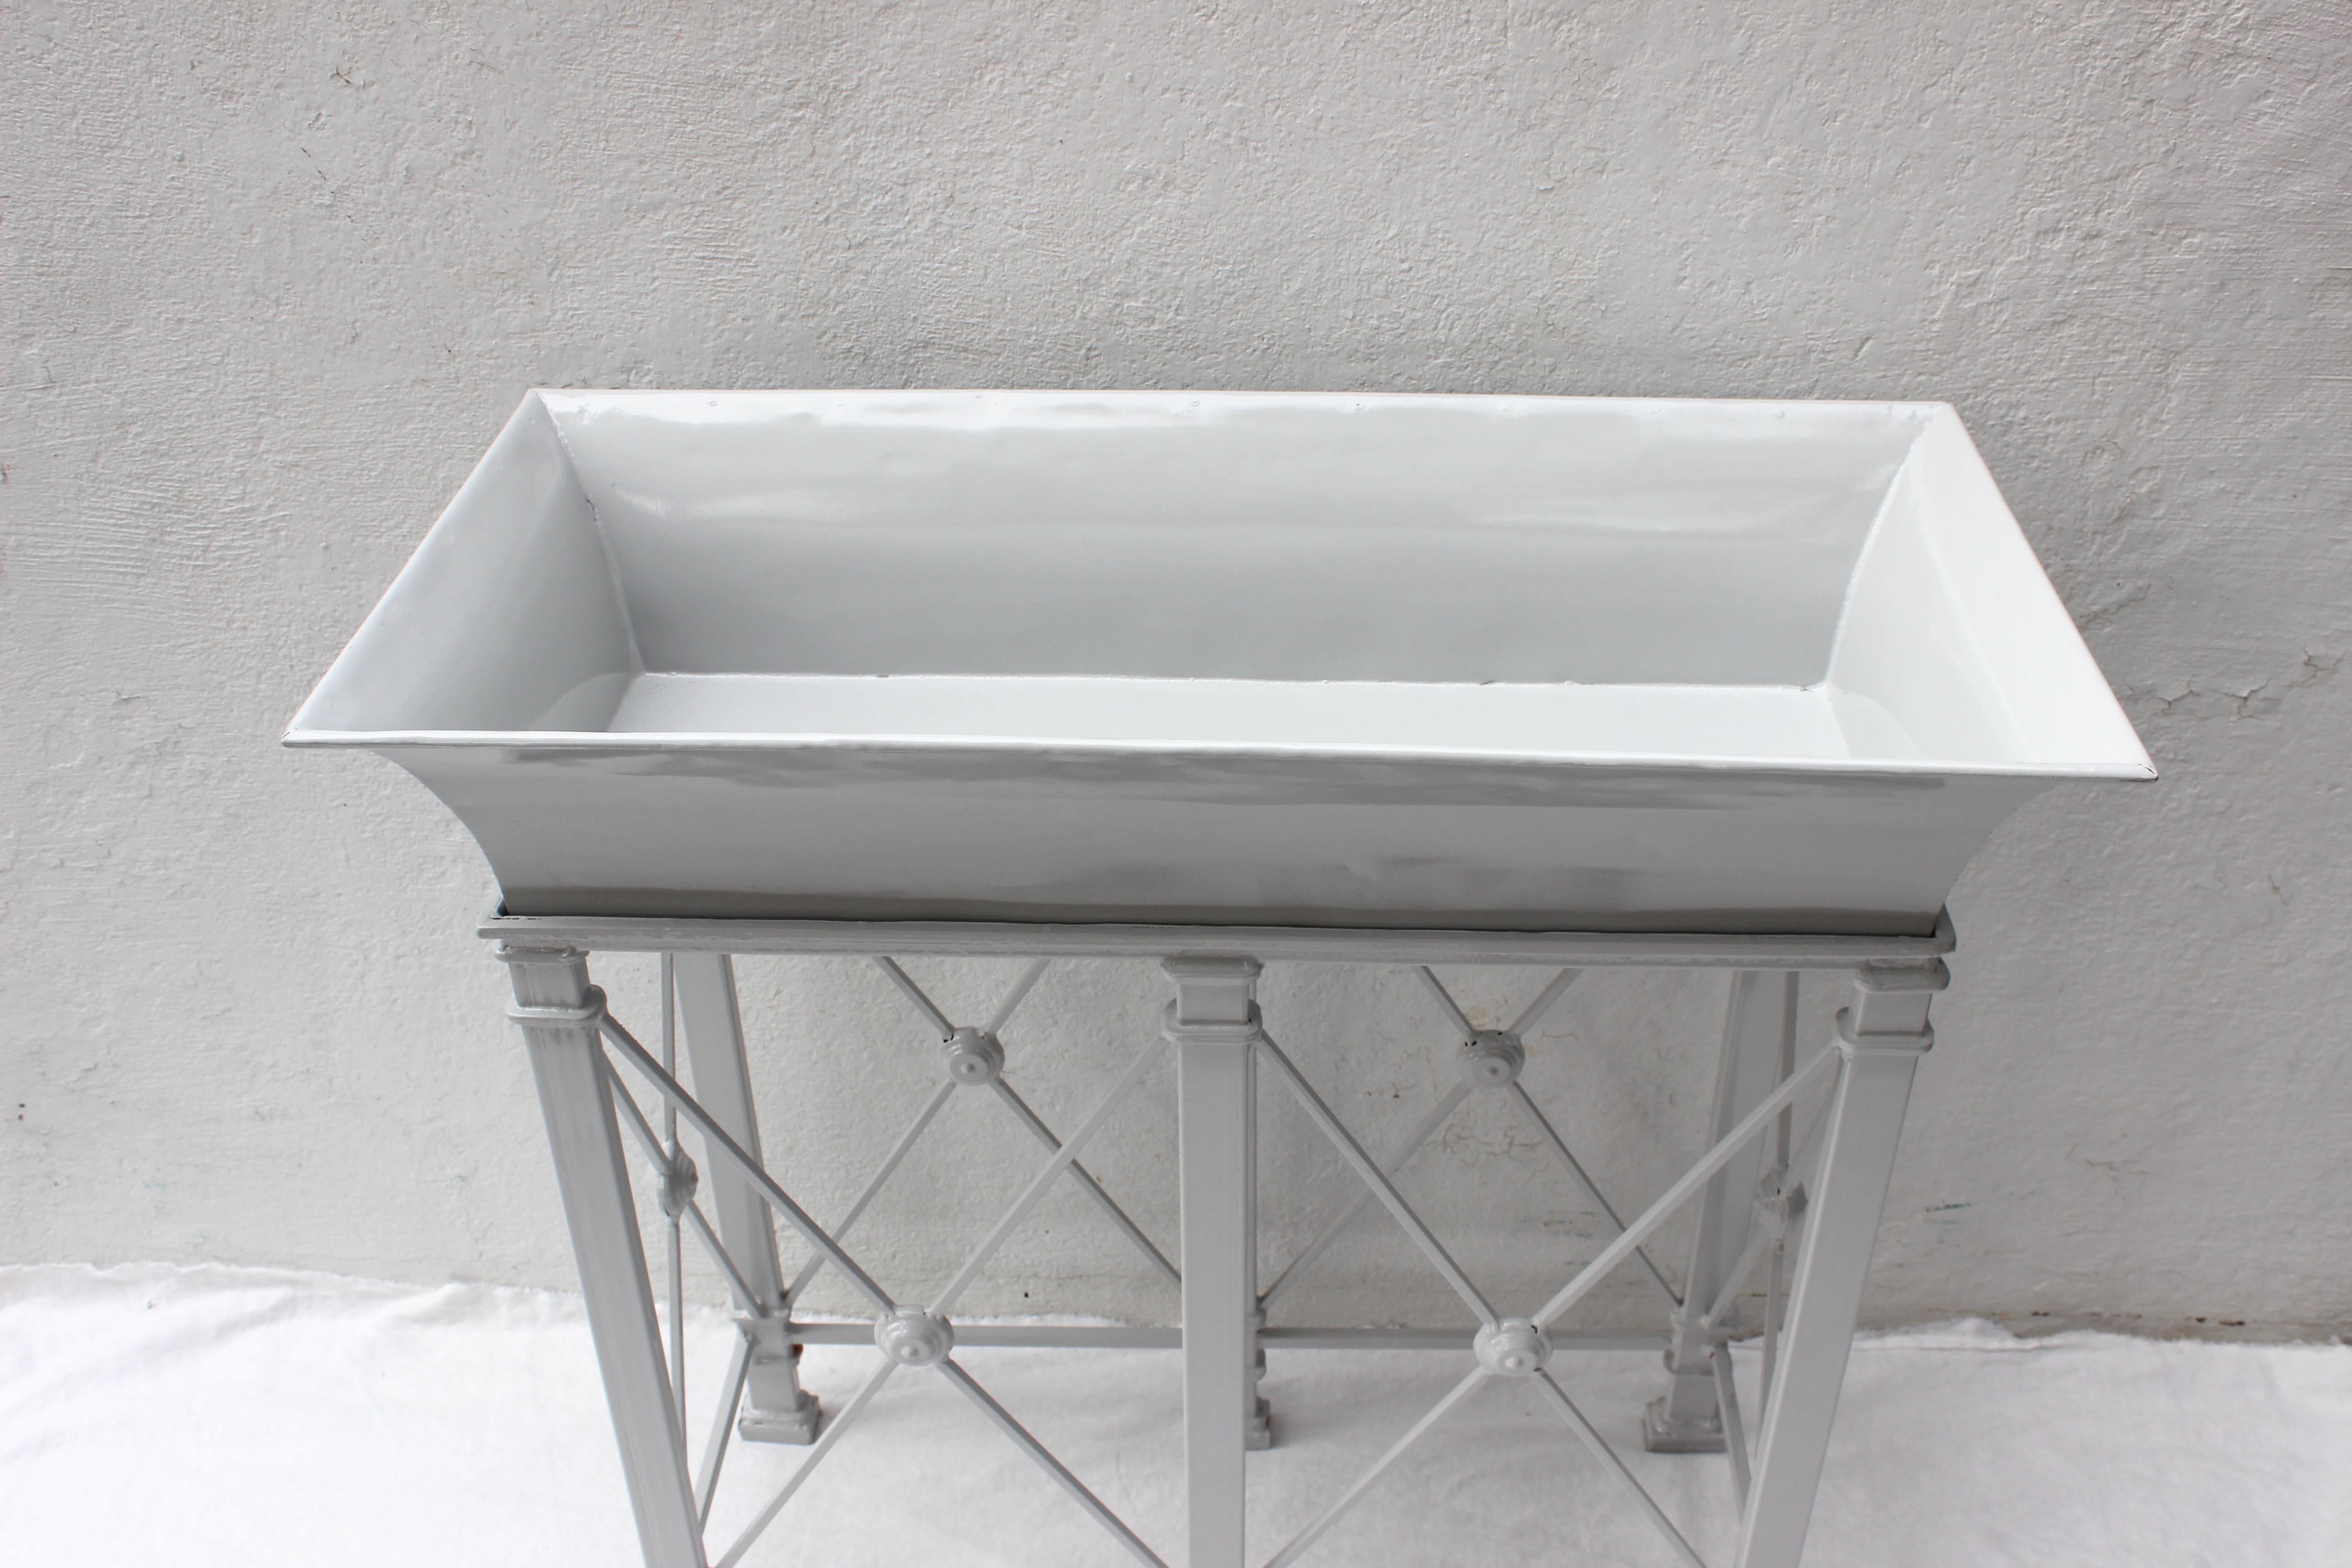 Two-piece metal planter newly painted in white.